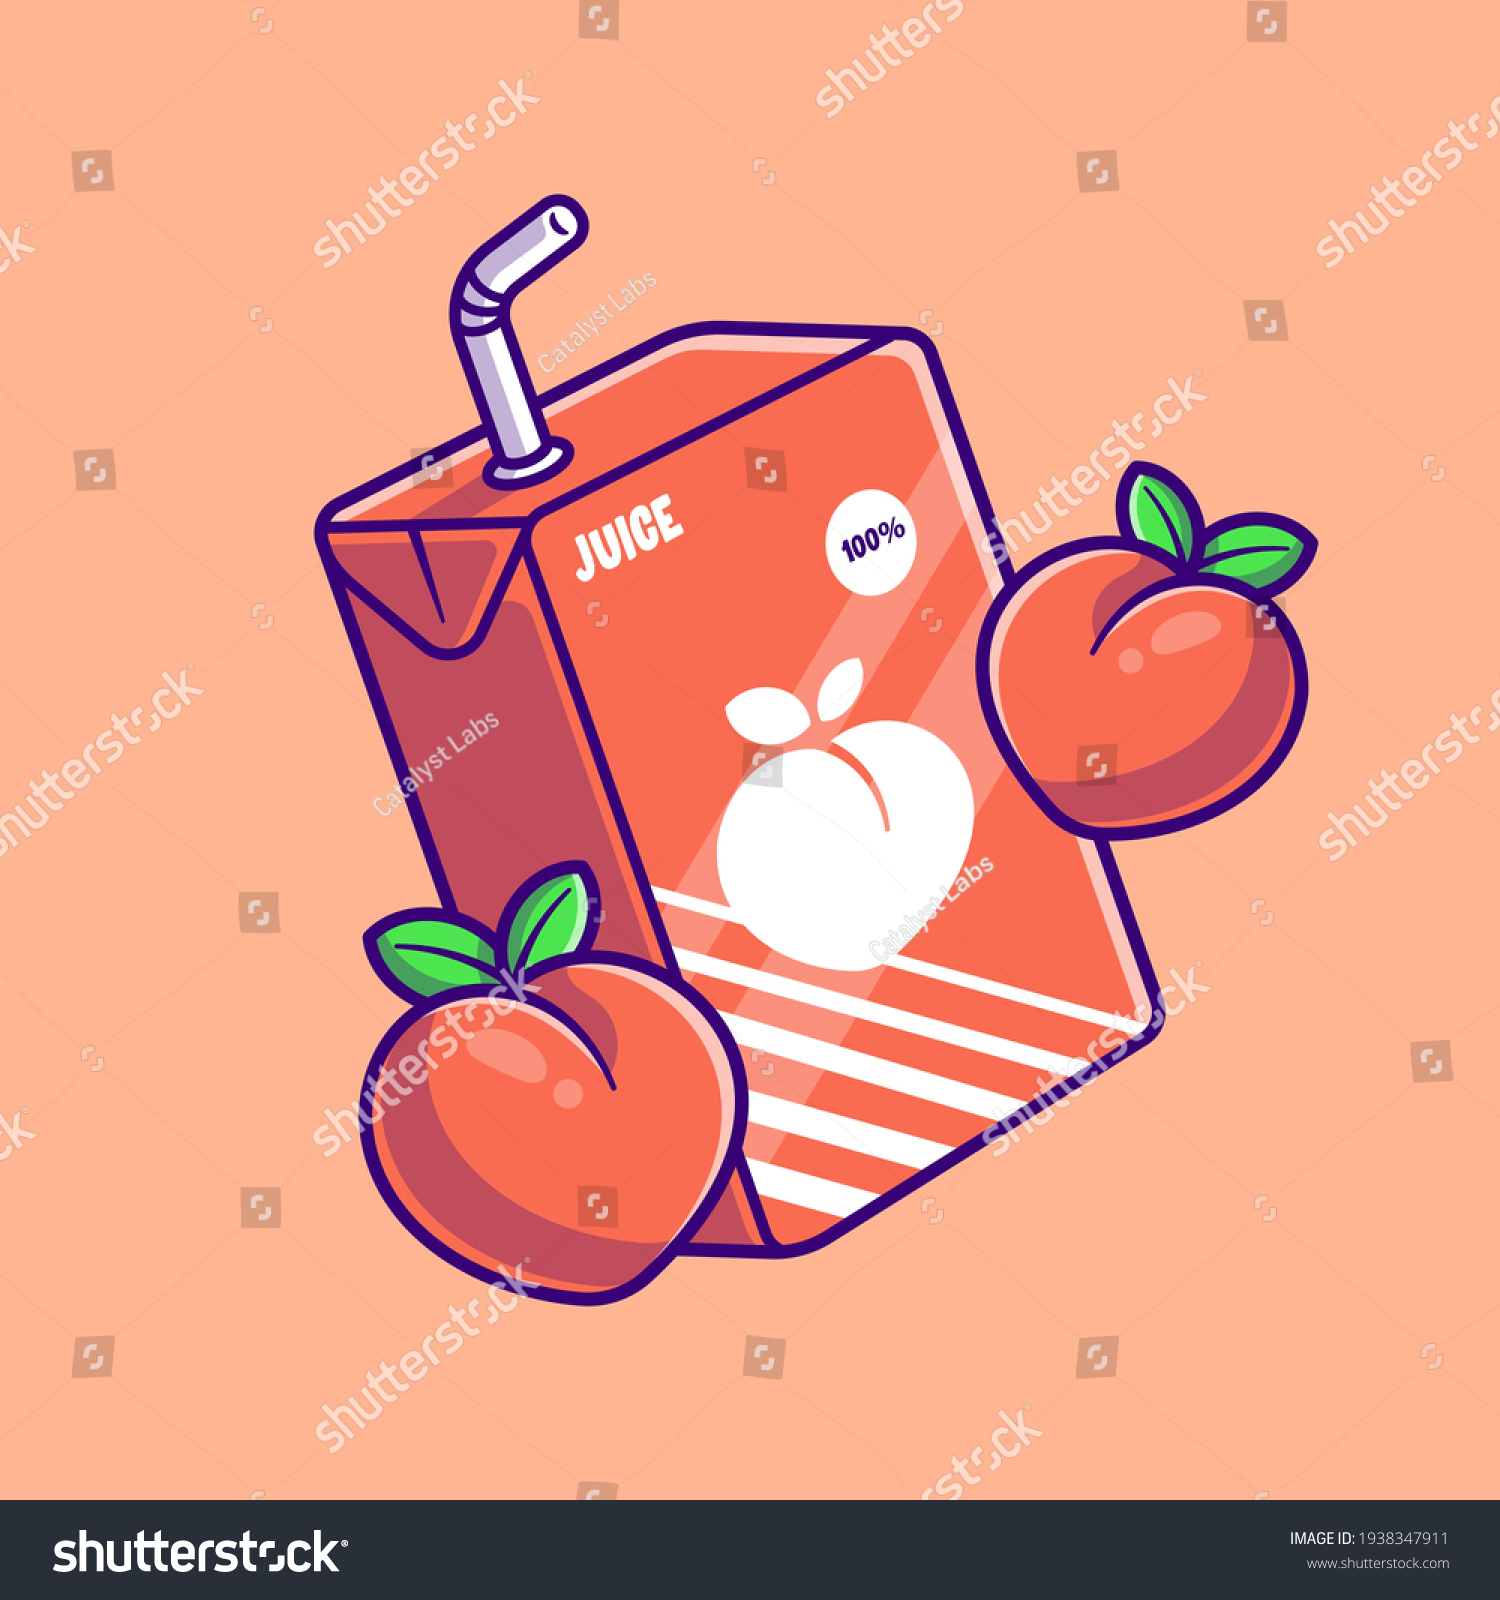 SVG of Peach Juice Box Cartoon Vector Icon Illustration. Food And Drink Icon Concept Isolated Premium Vector. Flat Cartoon Style svg